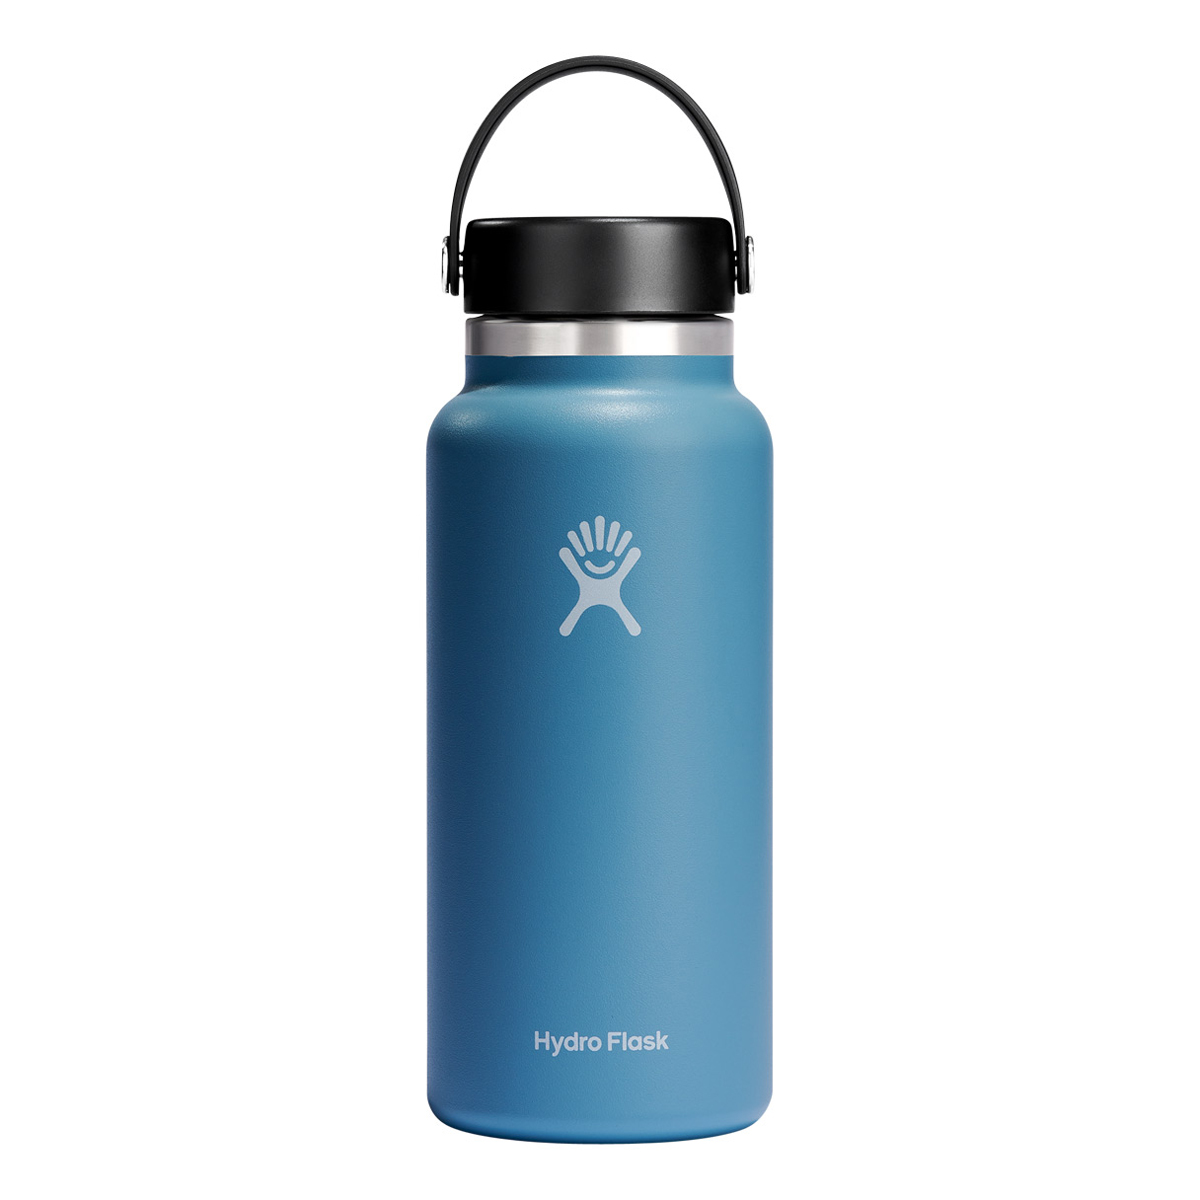 32. The design features of the Thermos flask 